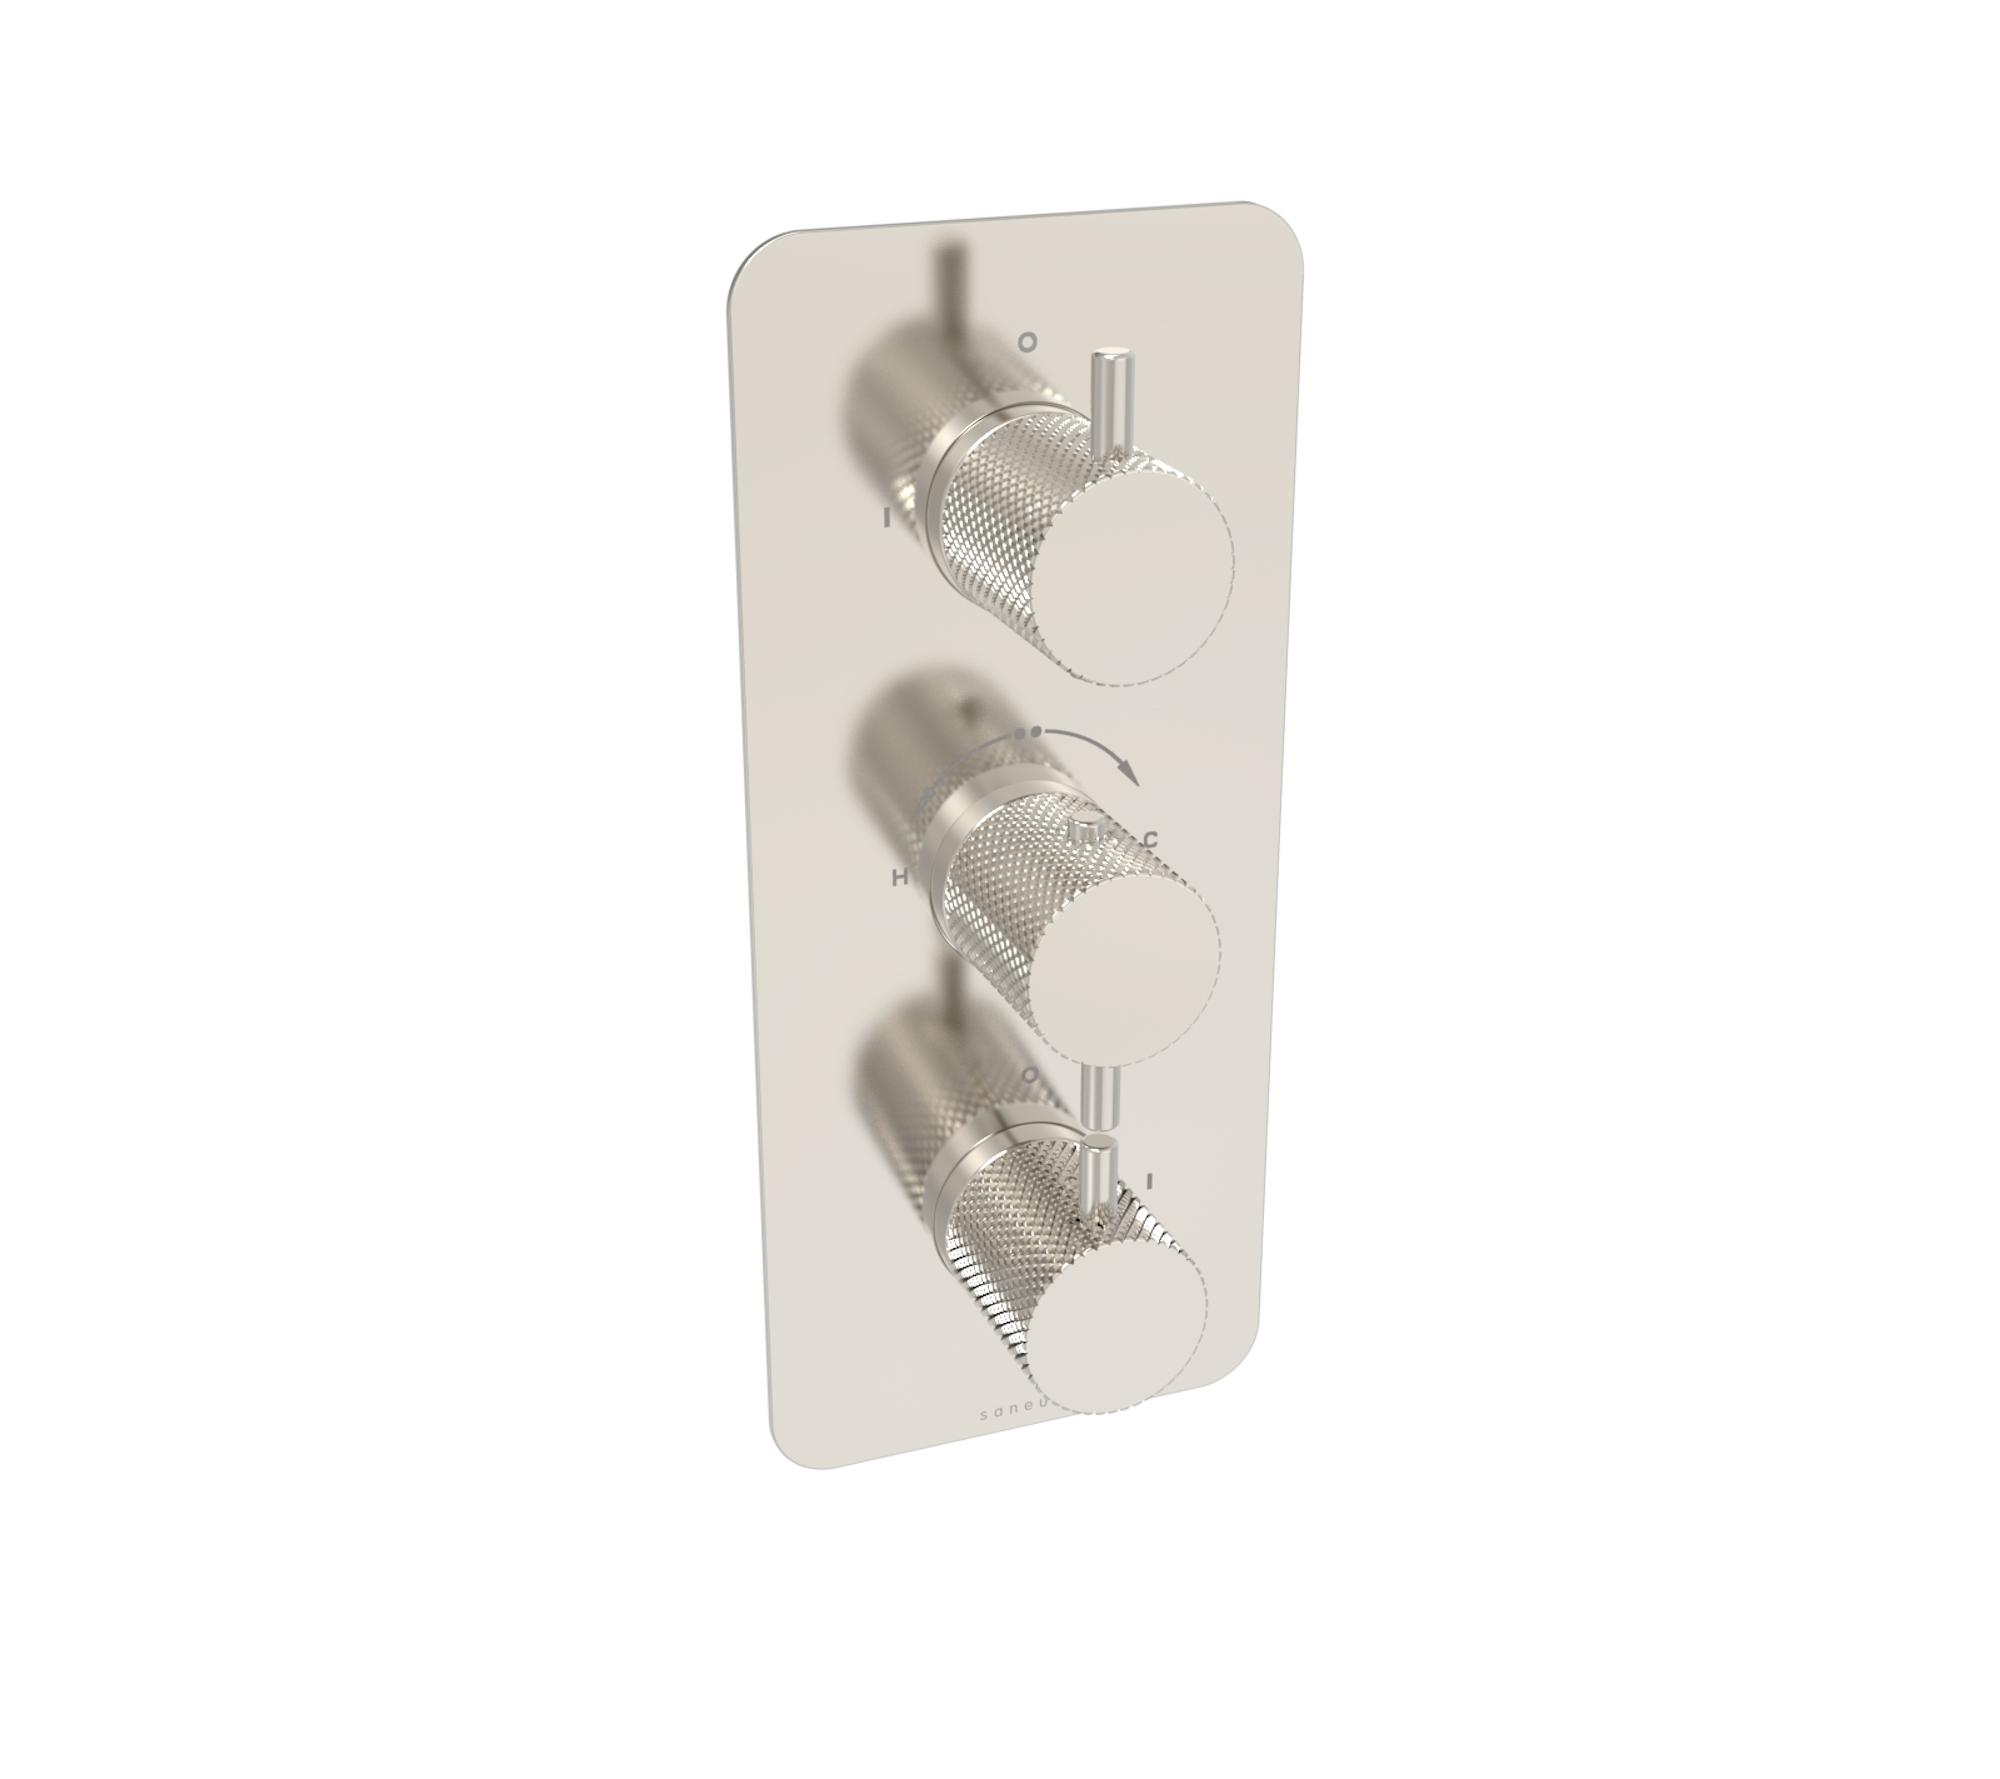 COS 3 way thermostatic shower valve kit with knurled handles - Brushed Nickel